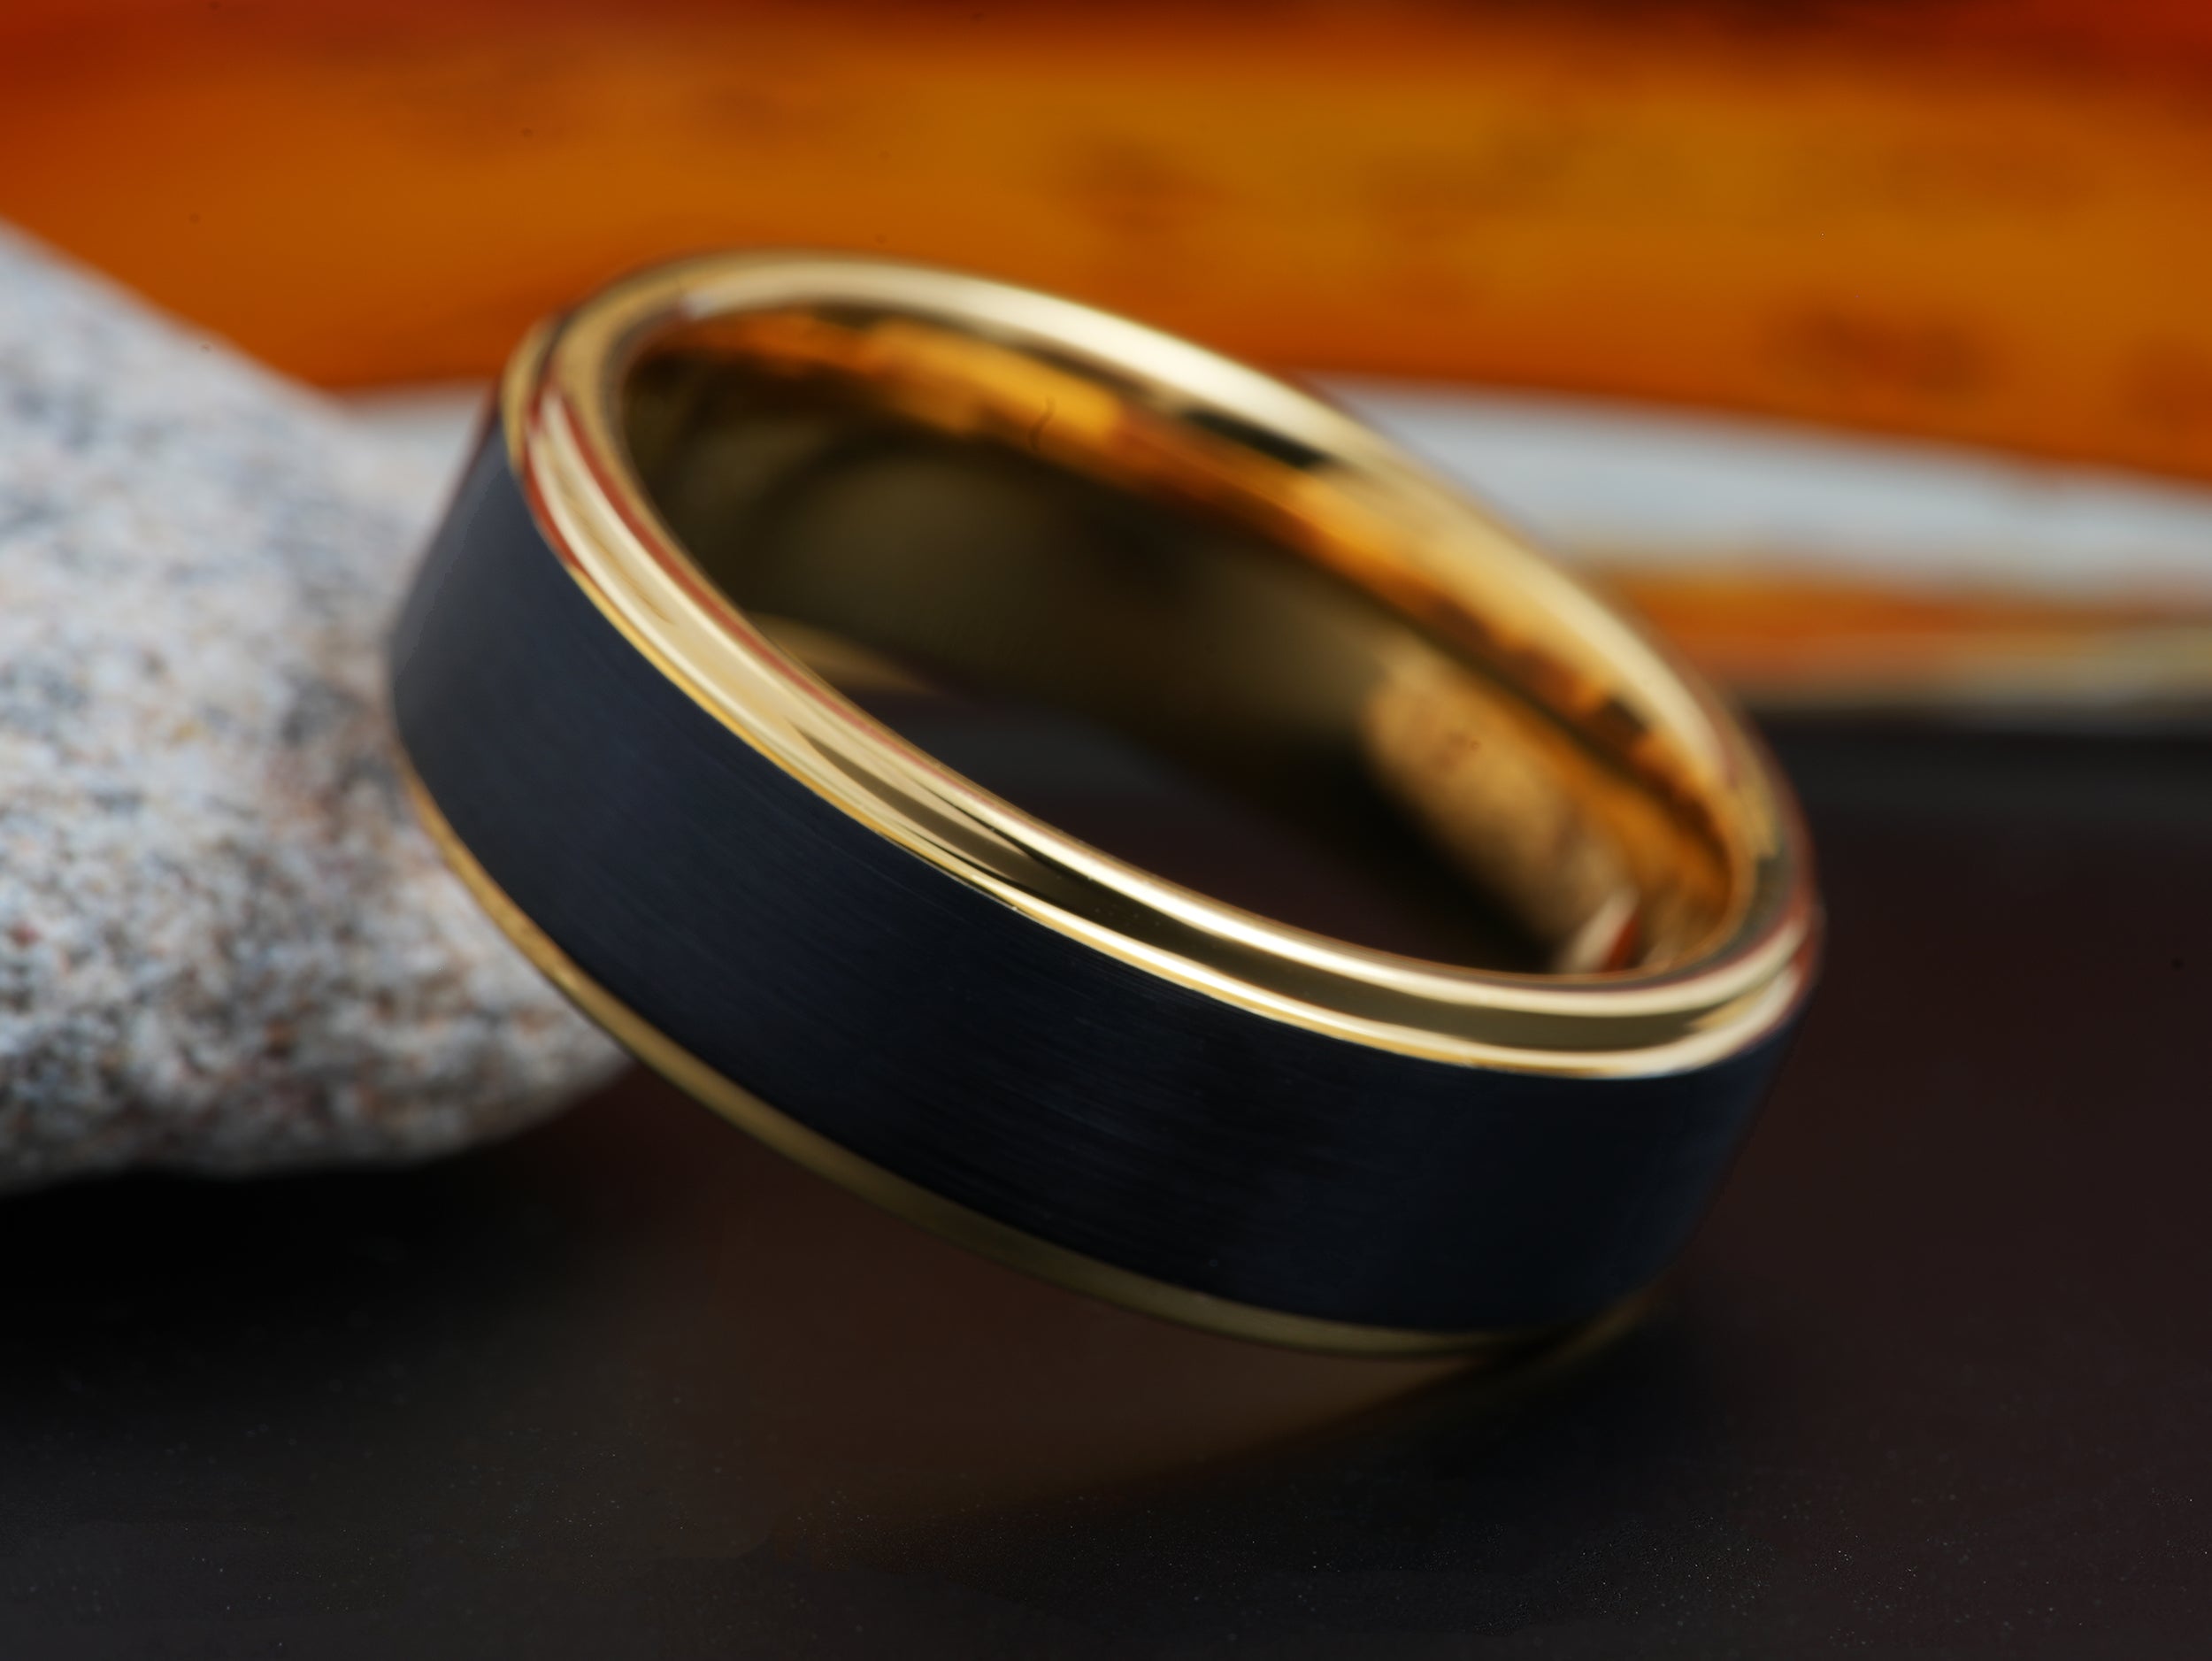 The Obscura | Black Wedding Band with Gold Plated Interior and Stepped Edges